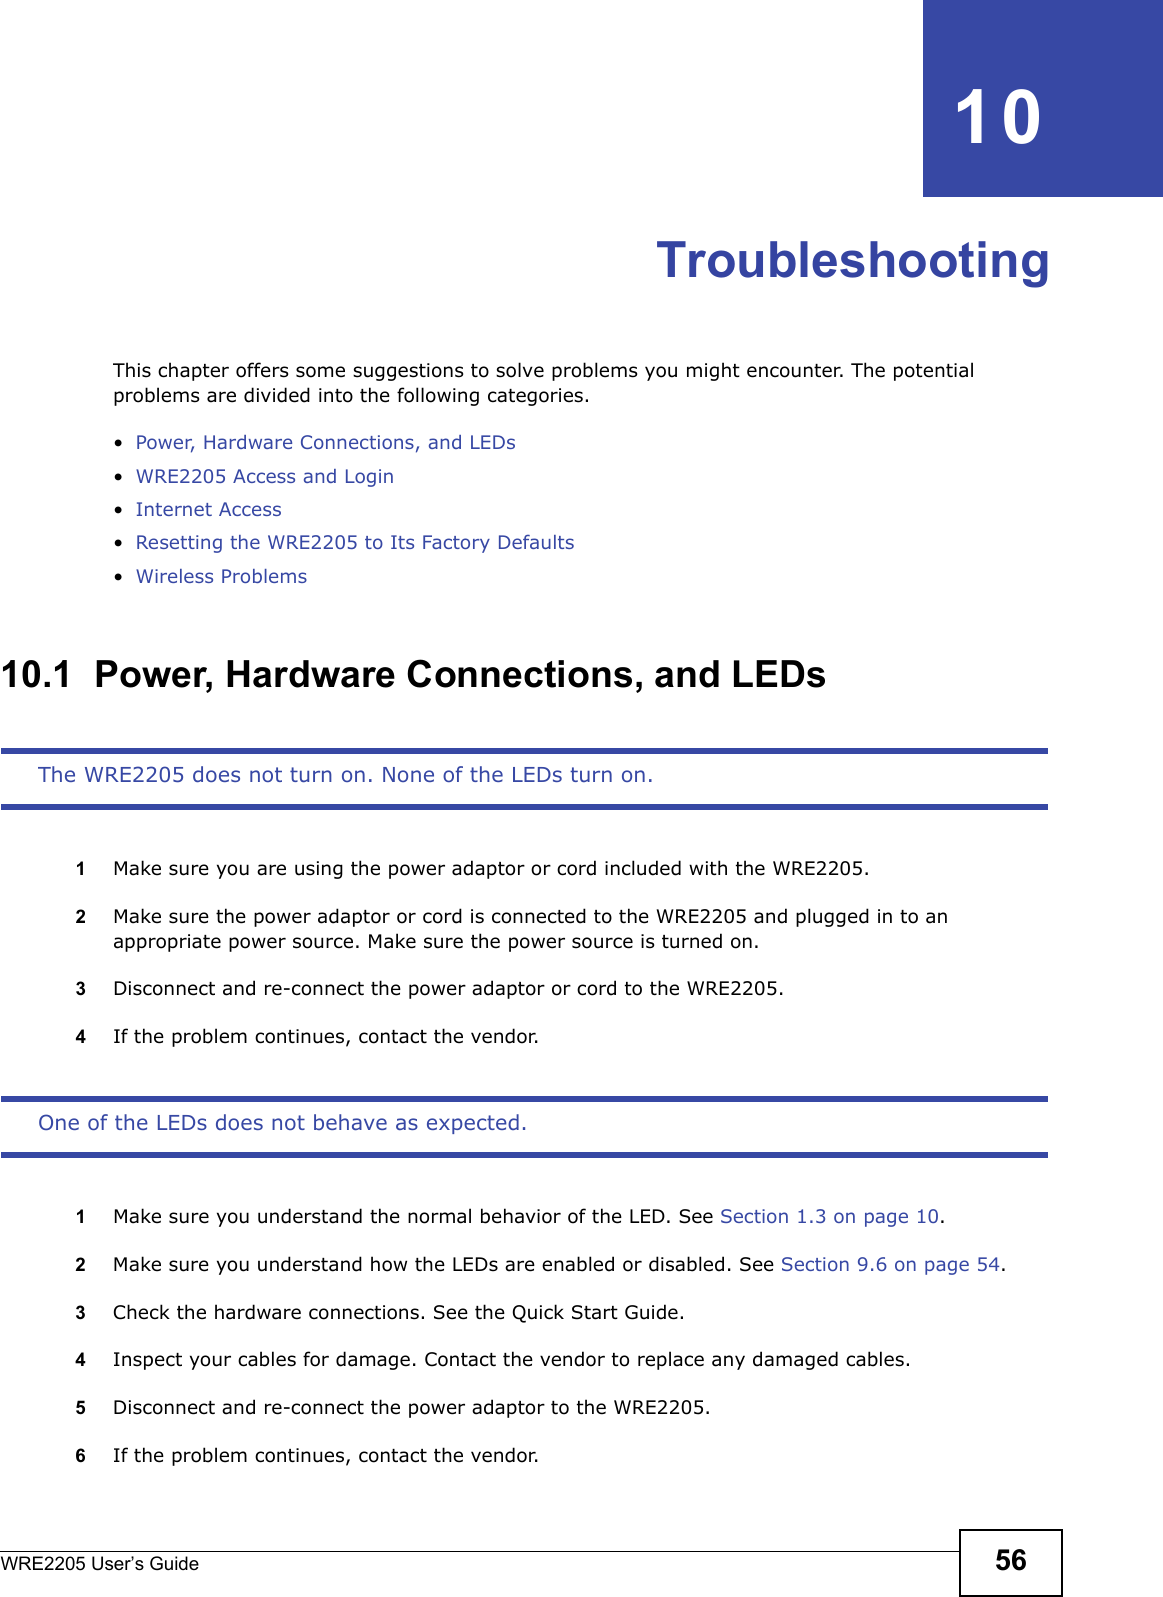 WRE2205 User’s Guide 56CHAPTER   10TroubleshootingThis chapter offers some suggestions to solve problems you might encounter. The potential problems are divided into the following categories. •Power, Hardware Connections, and LEDs•WRE2205 Access and Login•Internet Access•Resetting the WRE2205 to Its Factory Defaults•Wireless Problems10.1  Power, Hardware Connections, and LEDsThe WRE2205 does not turn on. None of the LEDs turn on.1Make sure you are using the power adaptor or cord included with the WRE2205.2Make sure the power adaptor or cord is connected to the WRE2205 and plugged in to an appropriate power source. Make sure the power source is turned on.3Disconnect and re-connect the power adaptor or cord to the WRE2205.4If the problem continues, contact the vendor.One of the LEDs does not behave as expected.1Make sure you understand the normal behavior of the LED. See Section 1.3 on page 10.2Make sure you understand how the LEDs are enabled or disabled. See Section 9.6 on page 54.3Check the hardware connections. See the Quick Start Guide. 4Inspect your cables for damage. Contact the vendor to replace any damaged cables.5Disconnect and re-connect the power adaptor to the WRE2205. 6If the problem continues, contact the vendor.